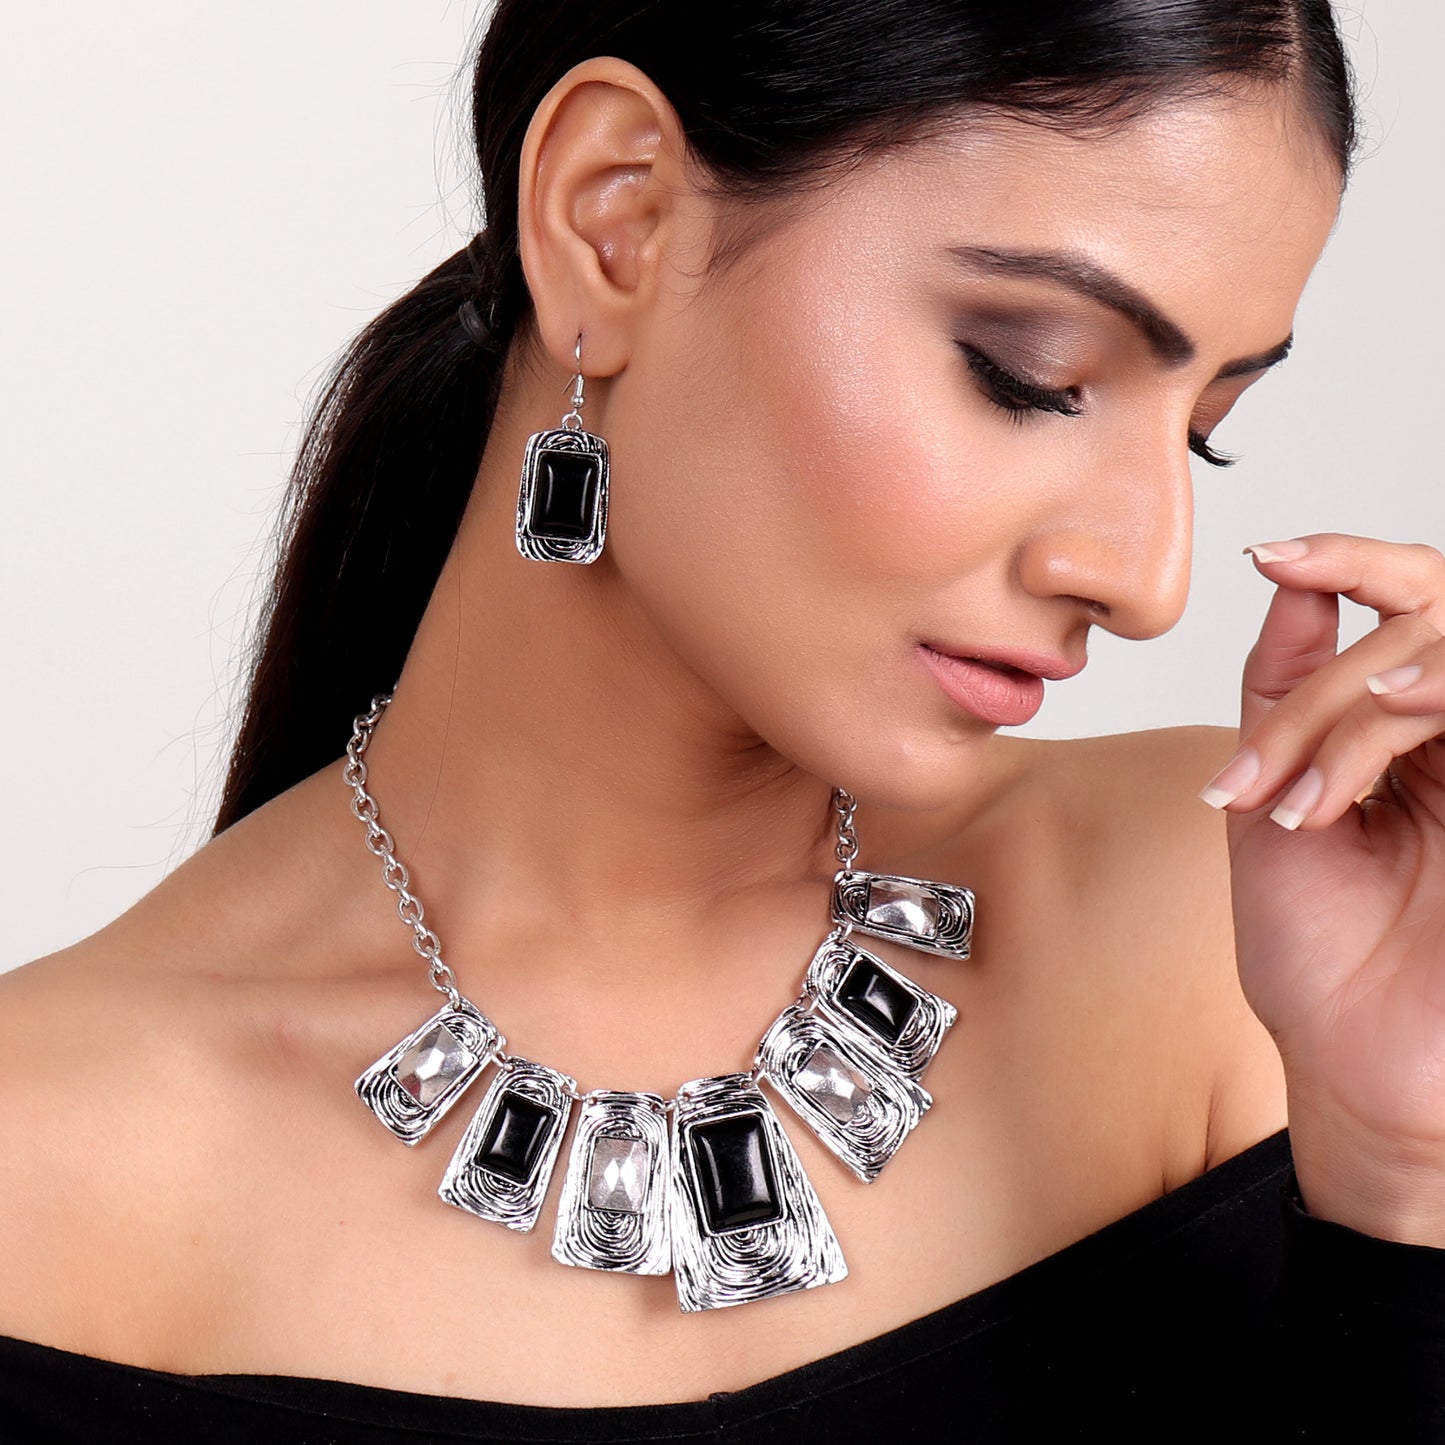 Necklace Set,High Fashion Metal Necklace Set in Black - Cippele Multi Store